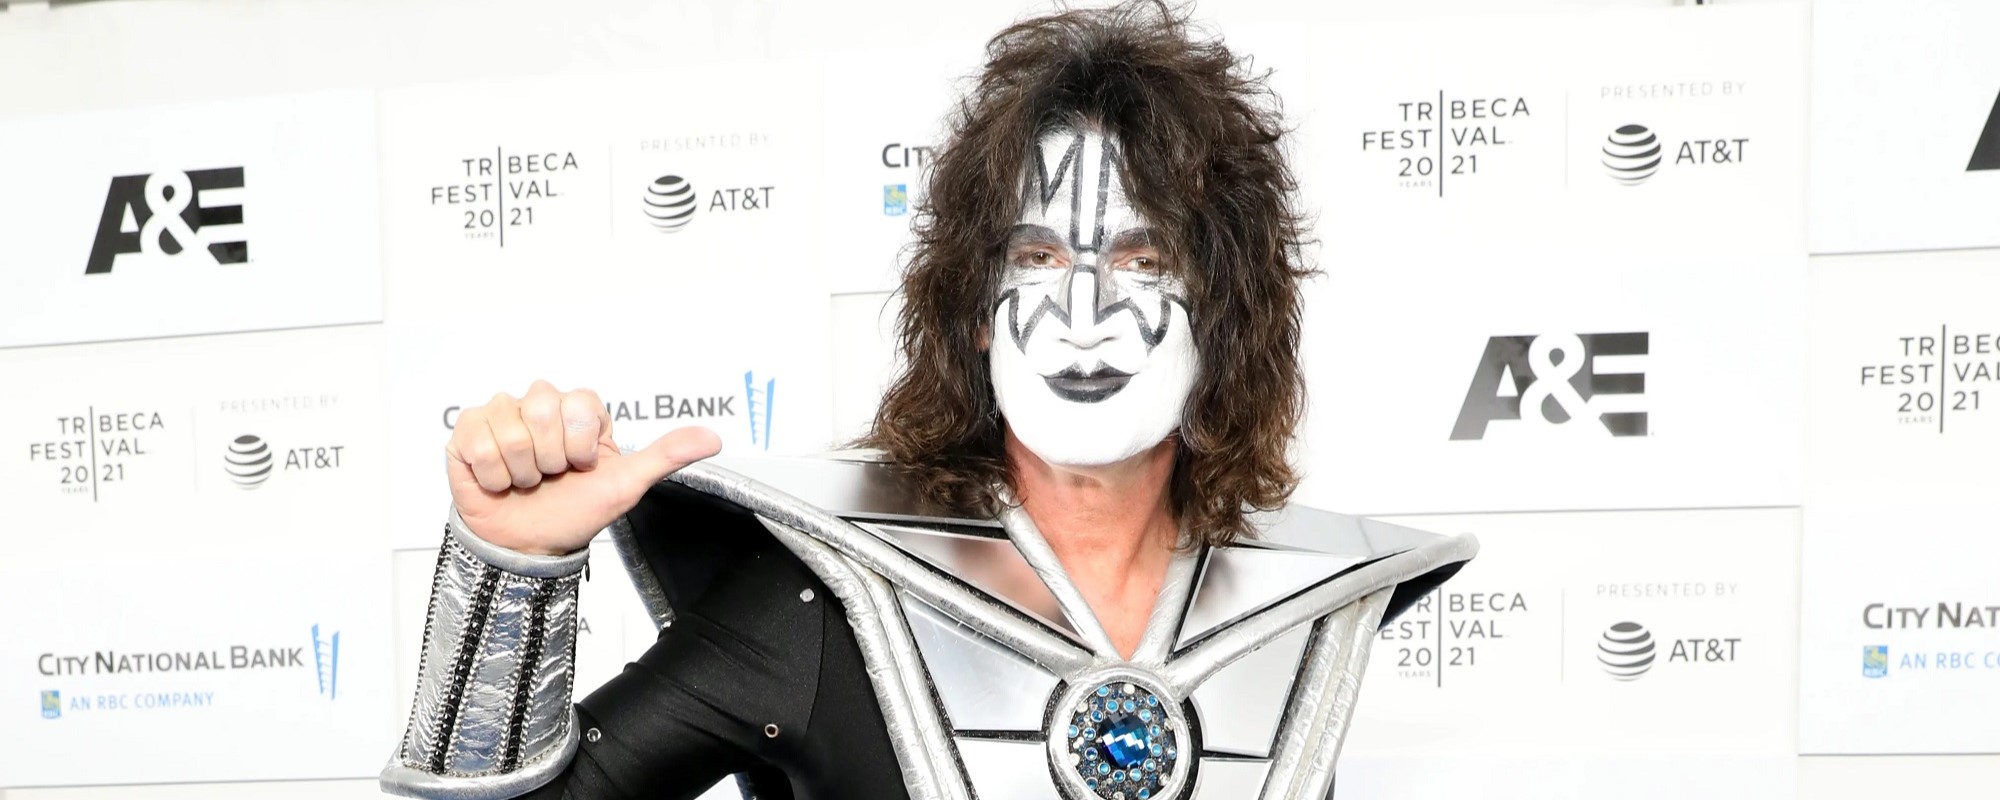 KISS Guitarist Tommy Thayer Shares Key Update on Avatar Show, Floats “Strong” Contending City To Host Show